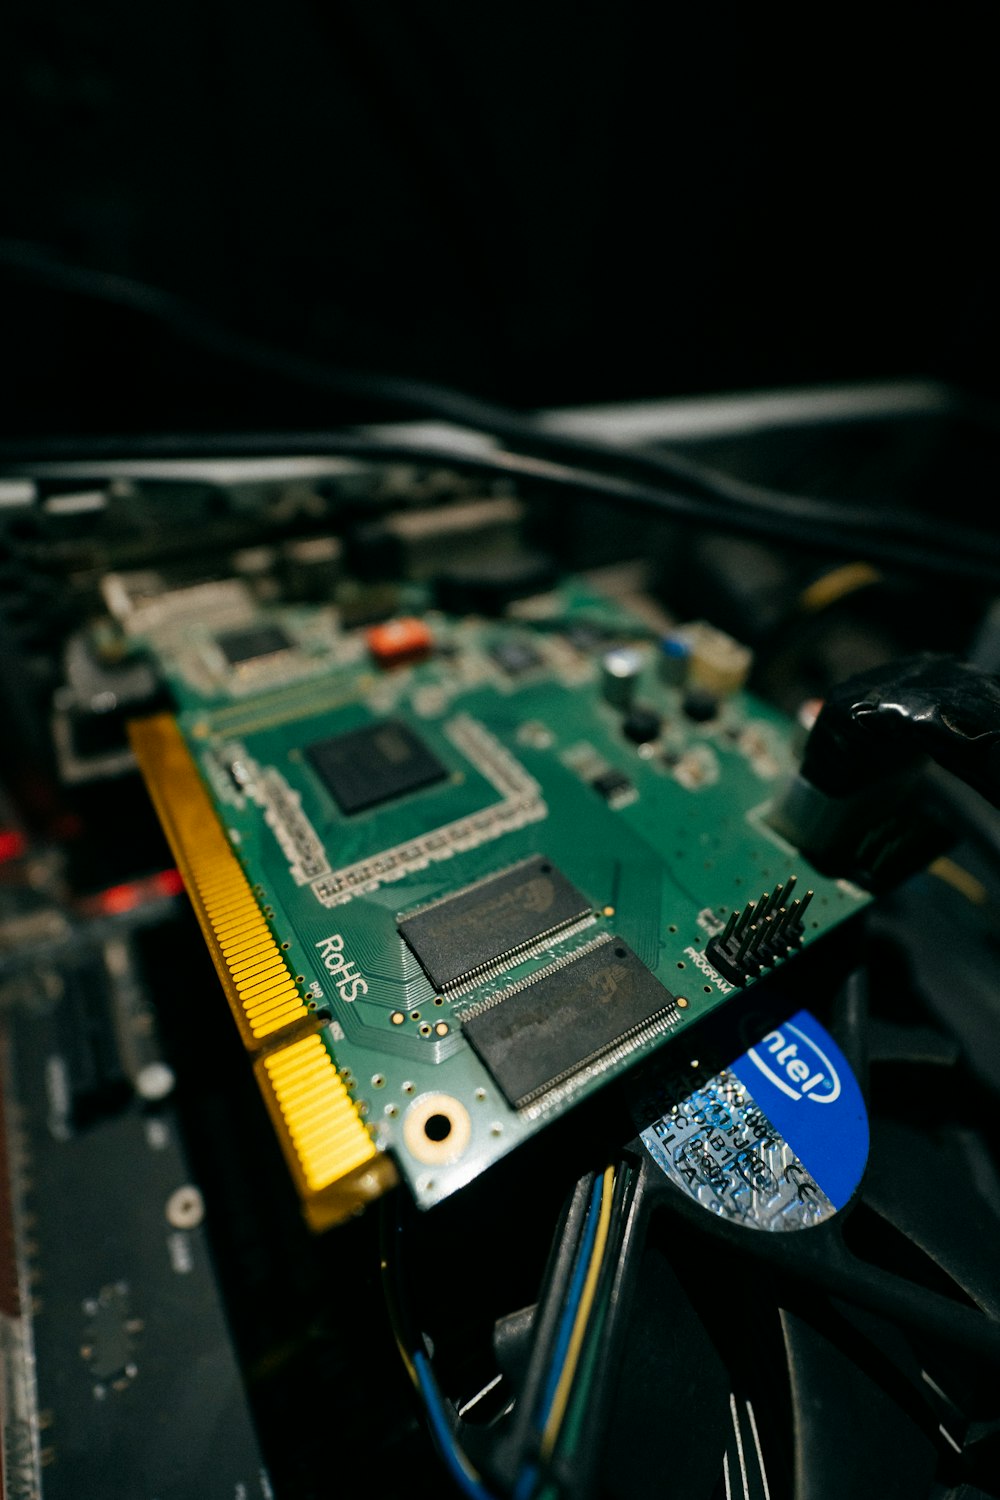 a close up of a computer motherboard with wires